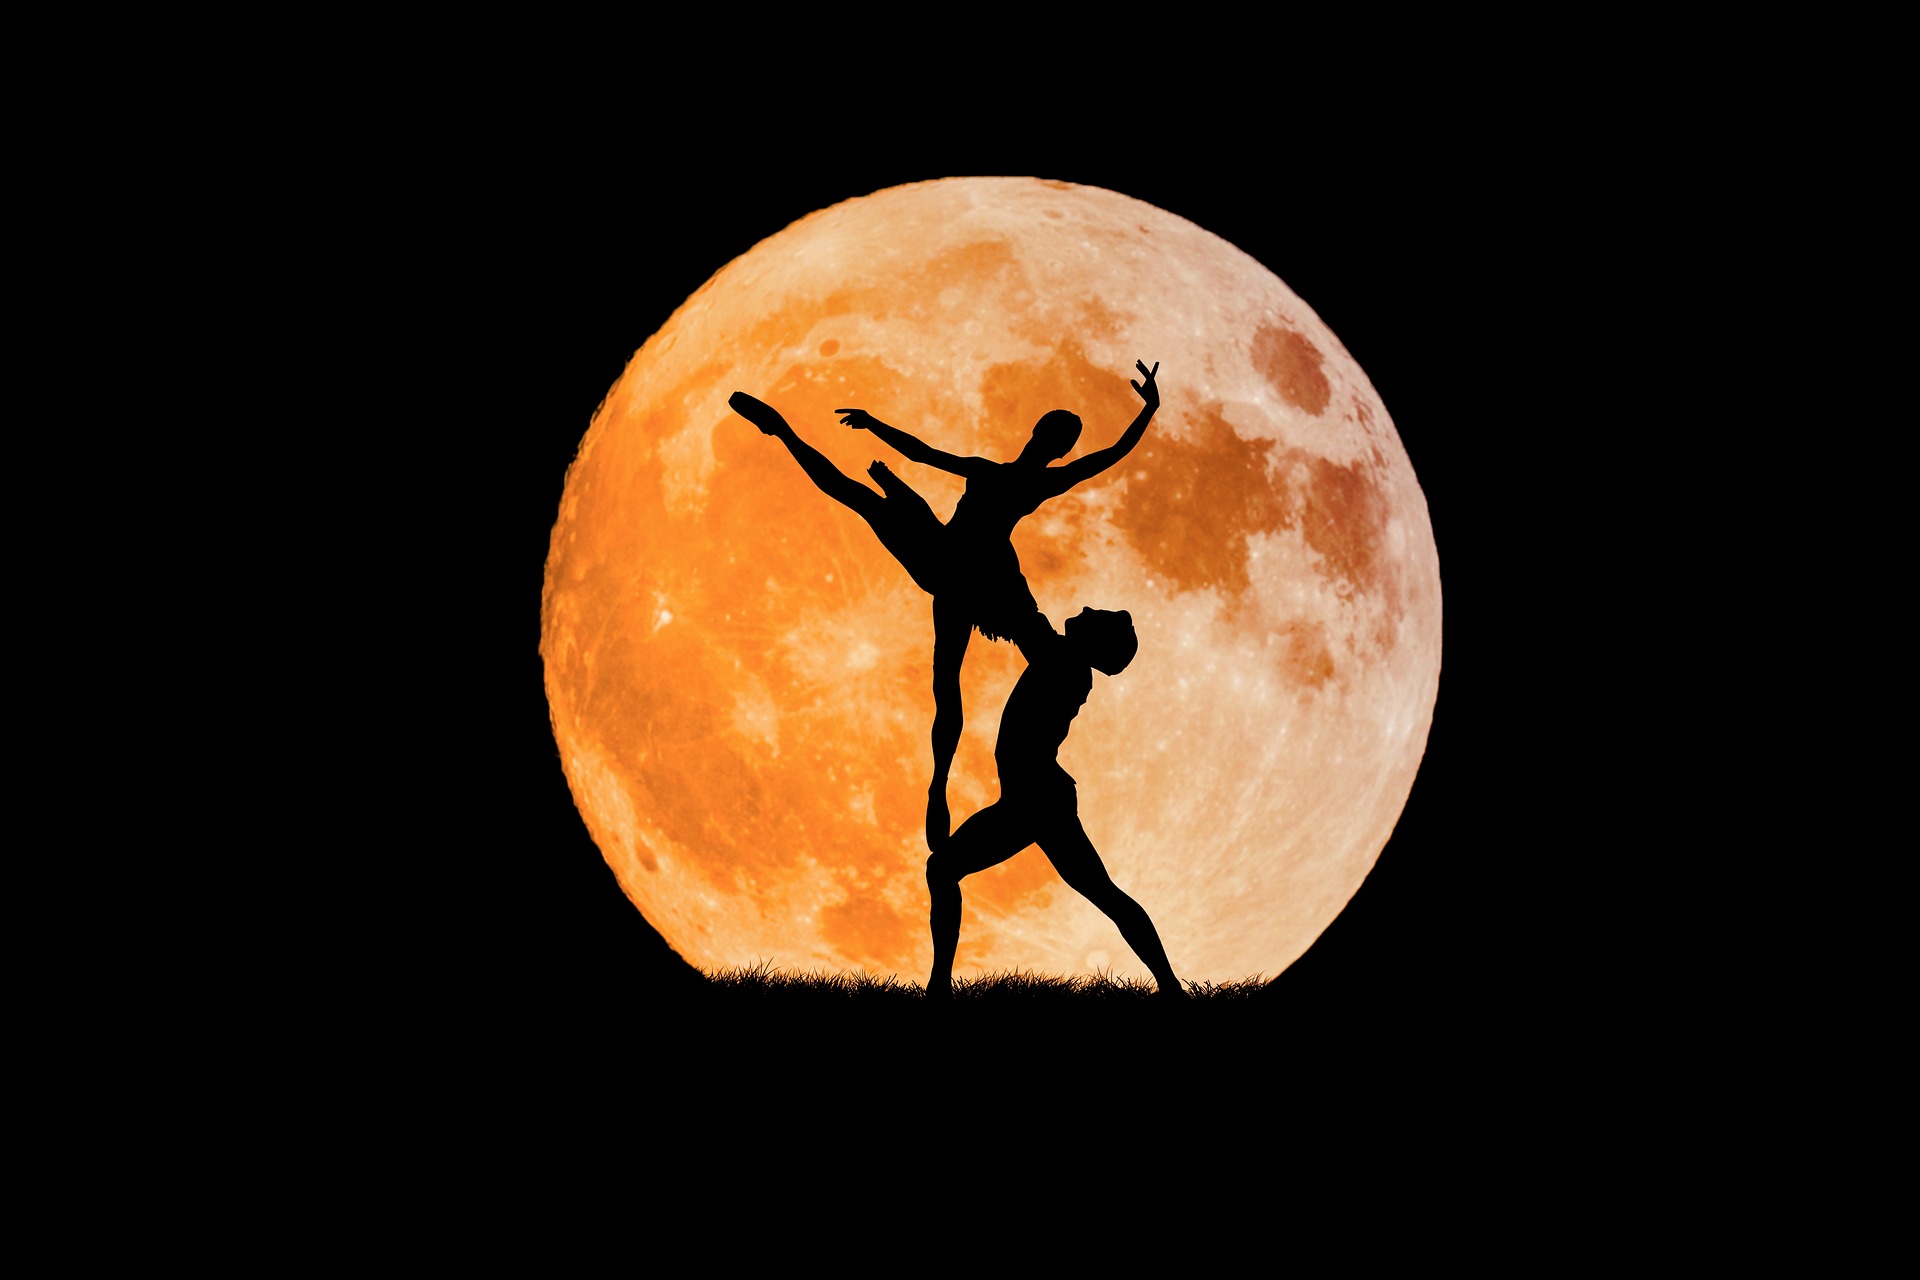 Two individuals dancing ballet in front of a full moon. | Source: Pixabay